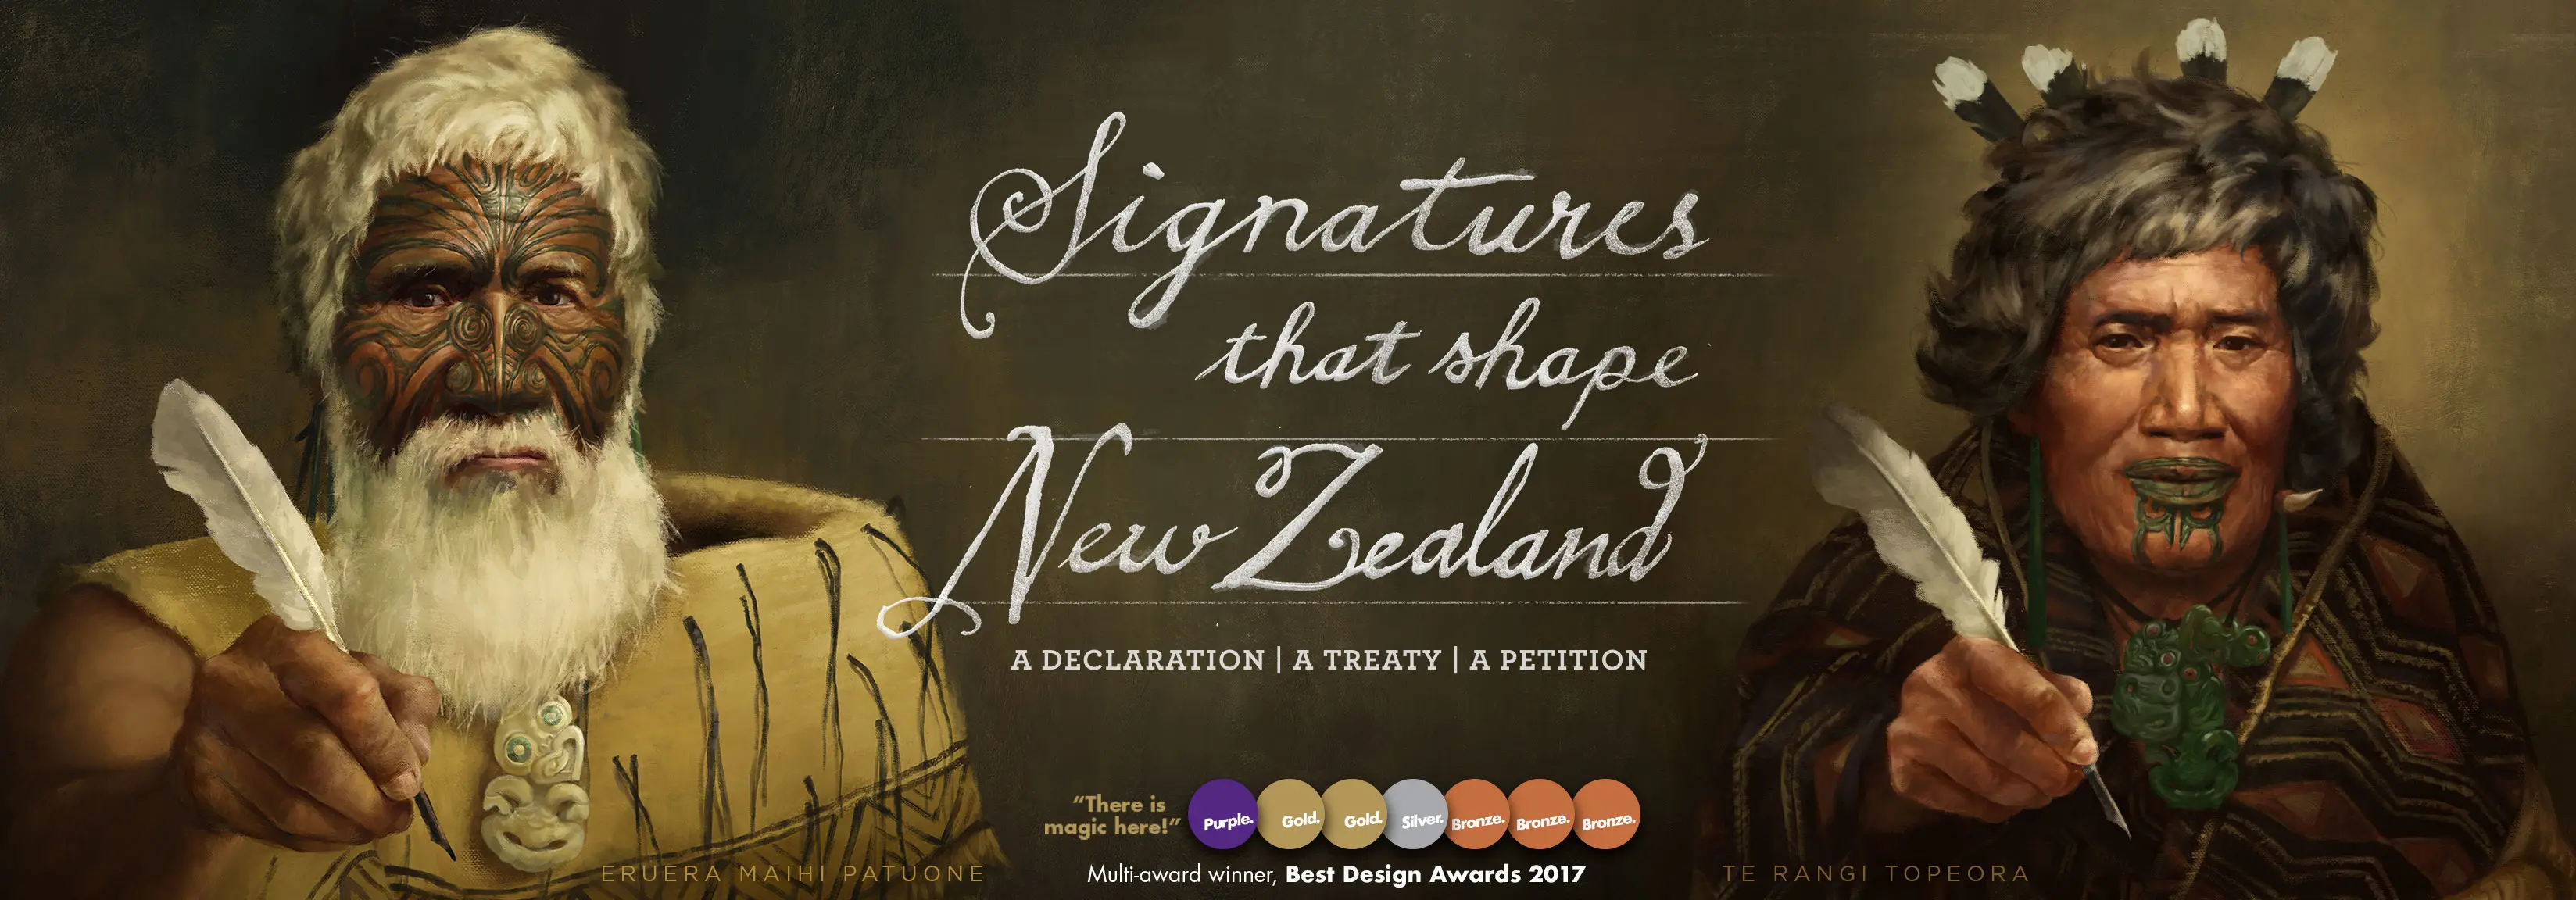 Signatures that shape New Zealand. Shows Patuone and Te Rangi Topeora, offering the pens they signed with.